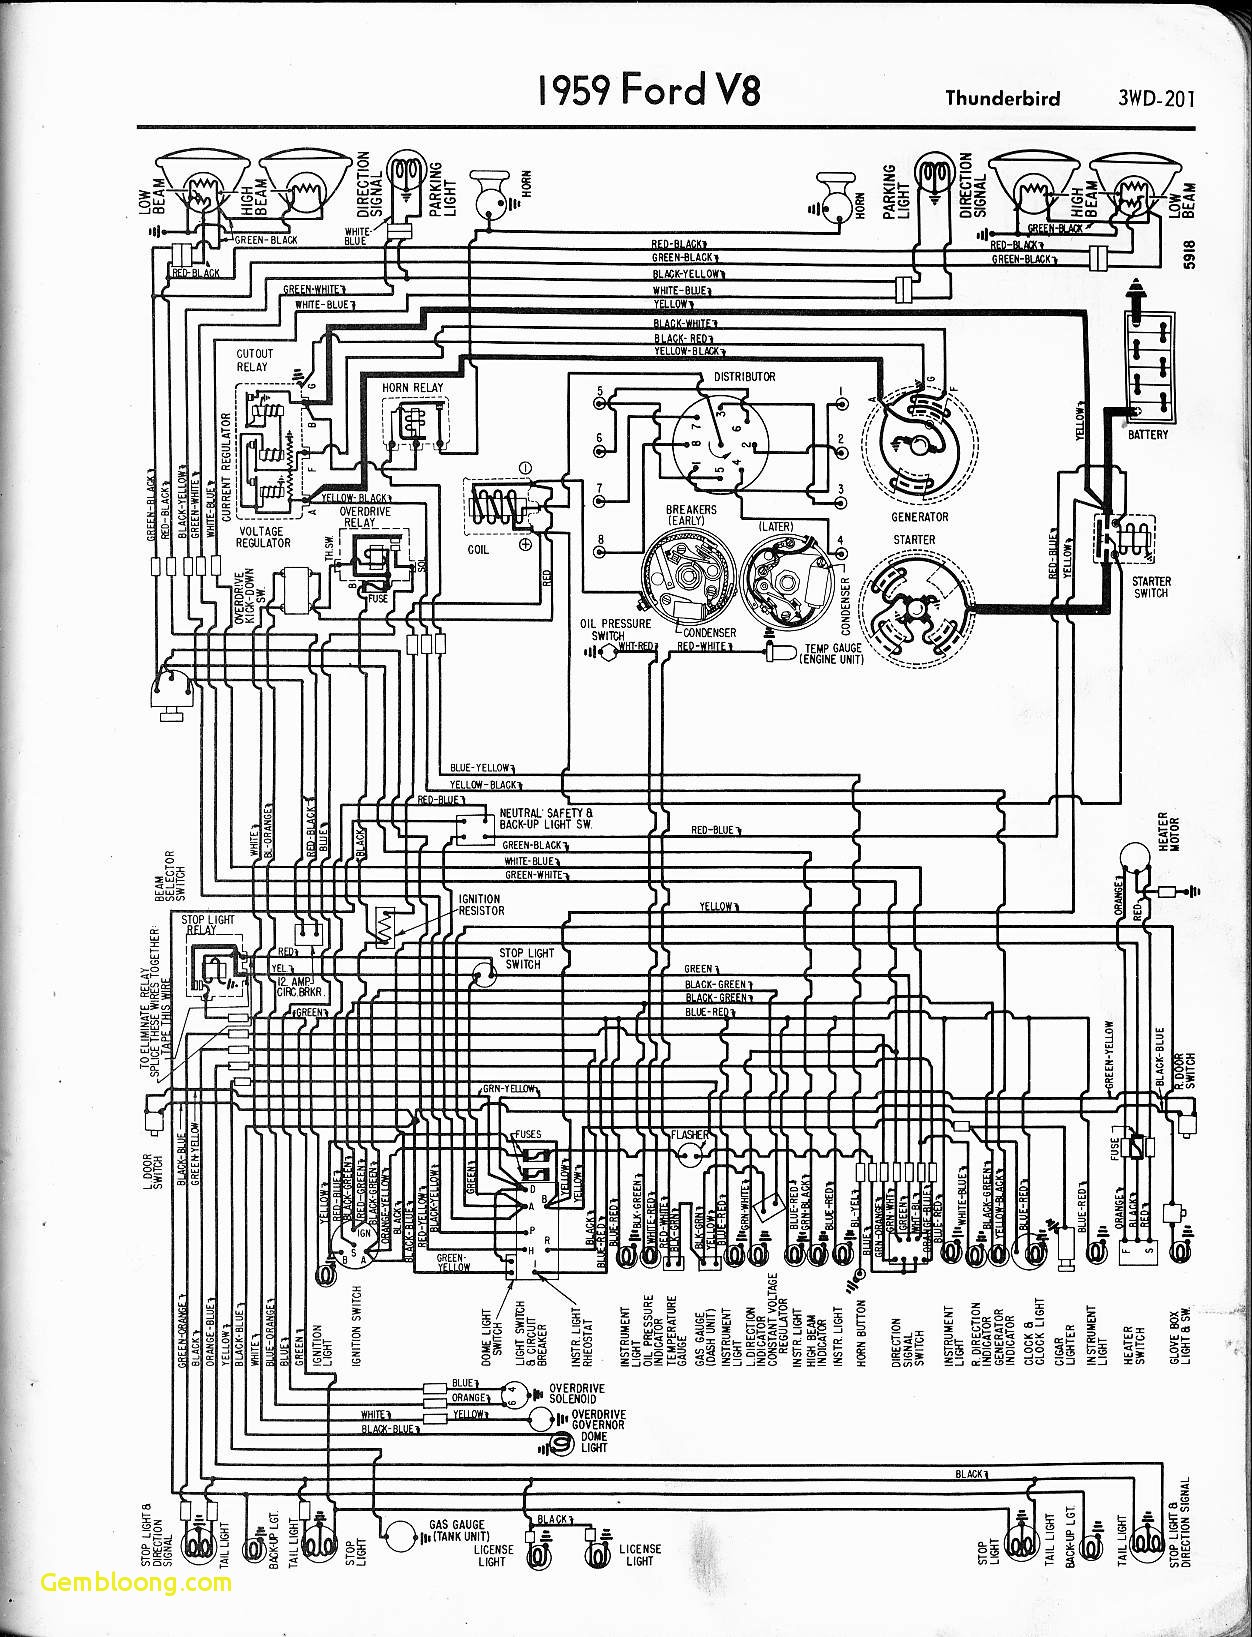 How An Engine Works Diagram Download ford Trucks Wiring Diagrams ford F150 Wiring Diagrams Best Of How An Engine Works Diagram